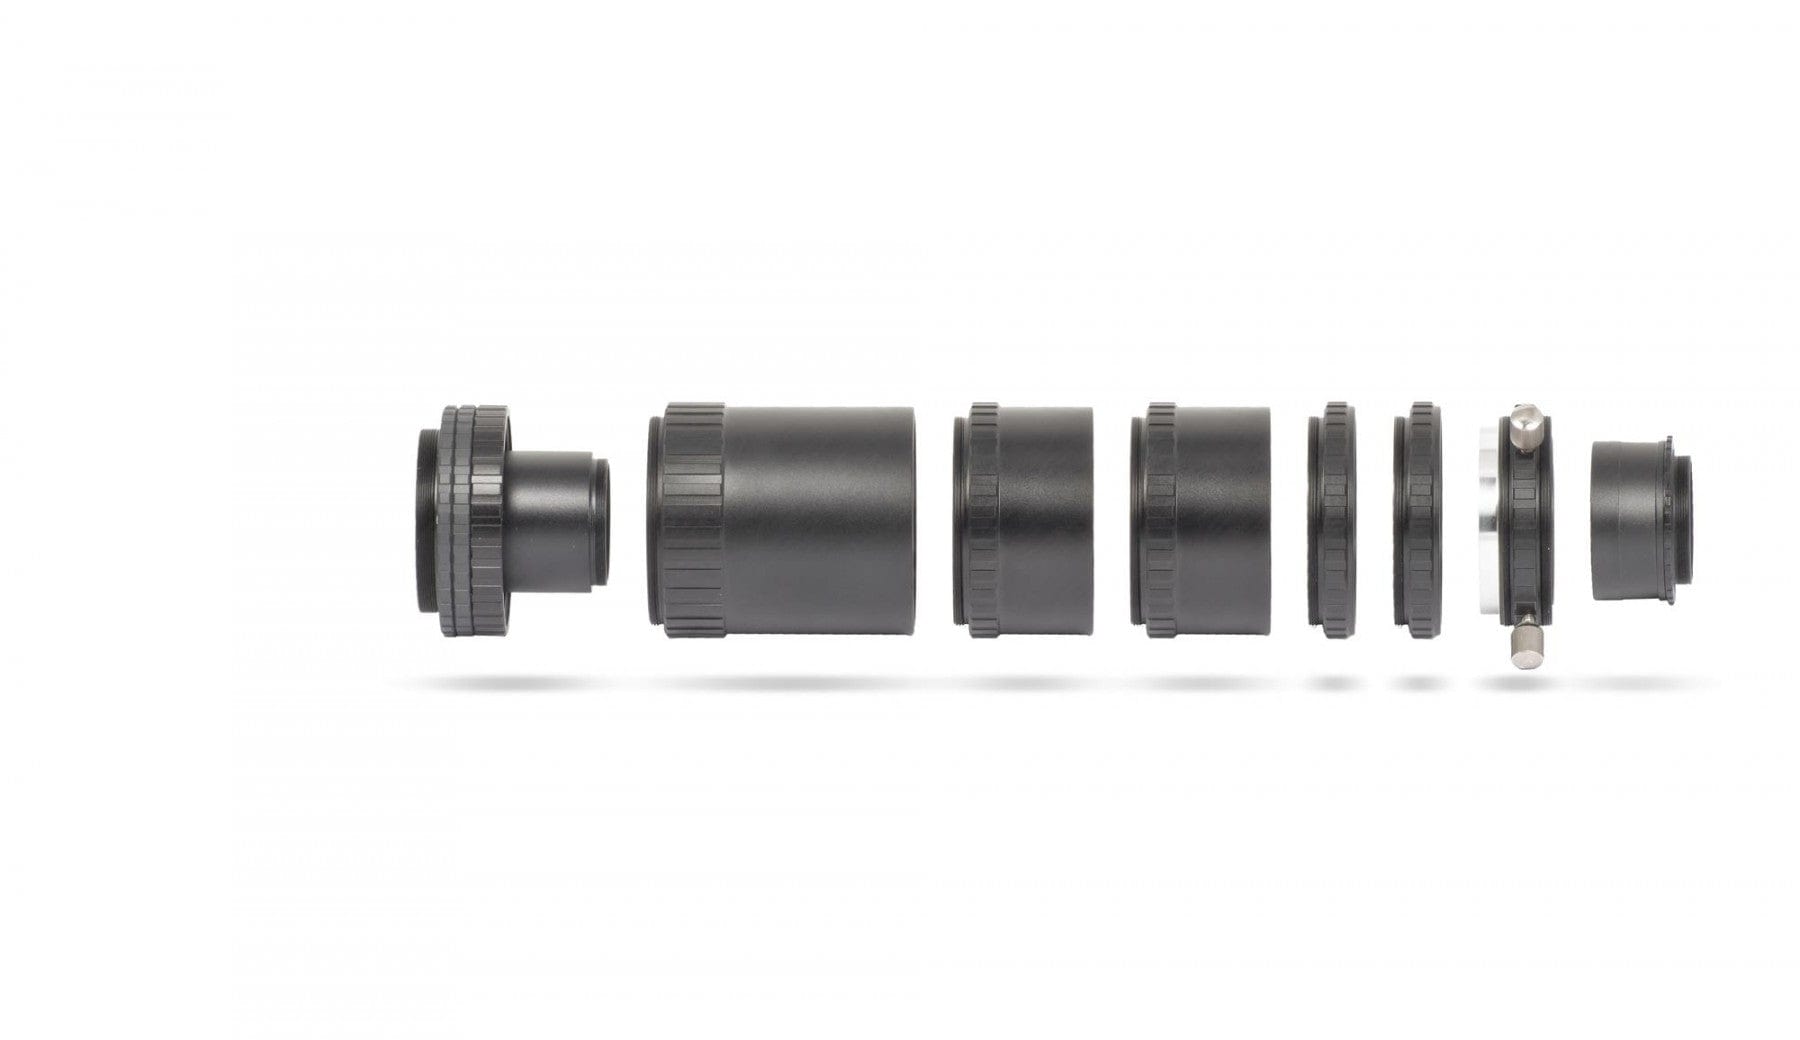 Baader Planetarium Accessory Baader M68 Tele-Compendium Set of connectors and spacers (* Only available together with FFC or TZ-systems) - 2459258